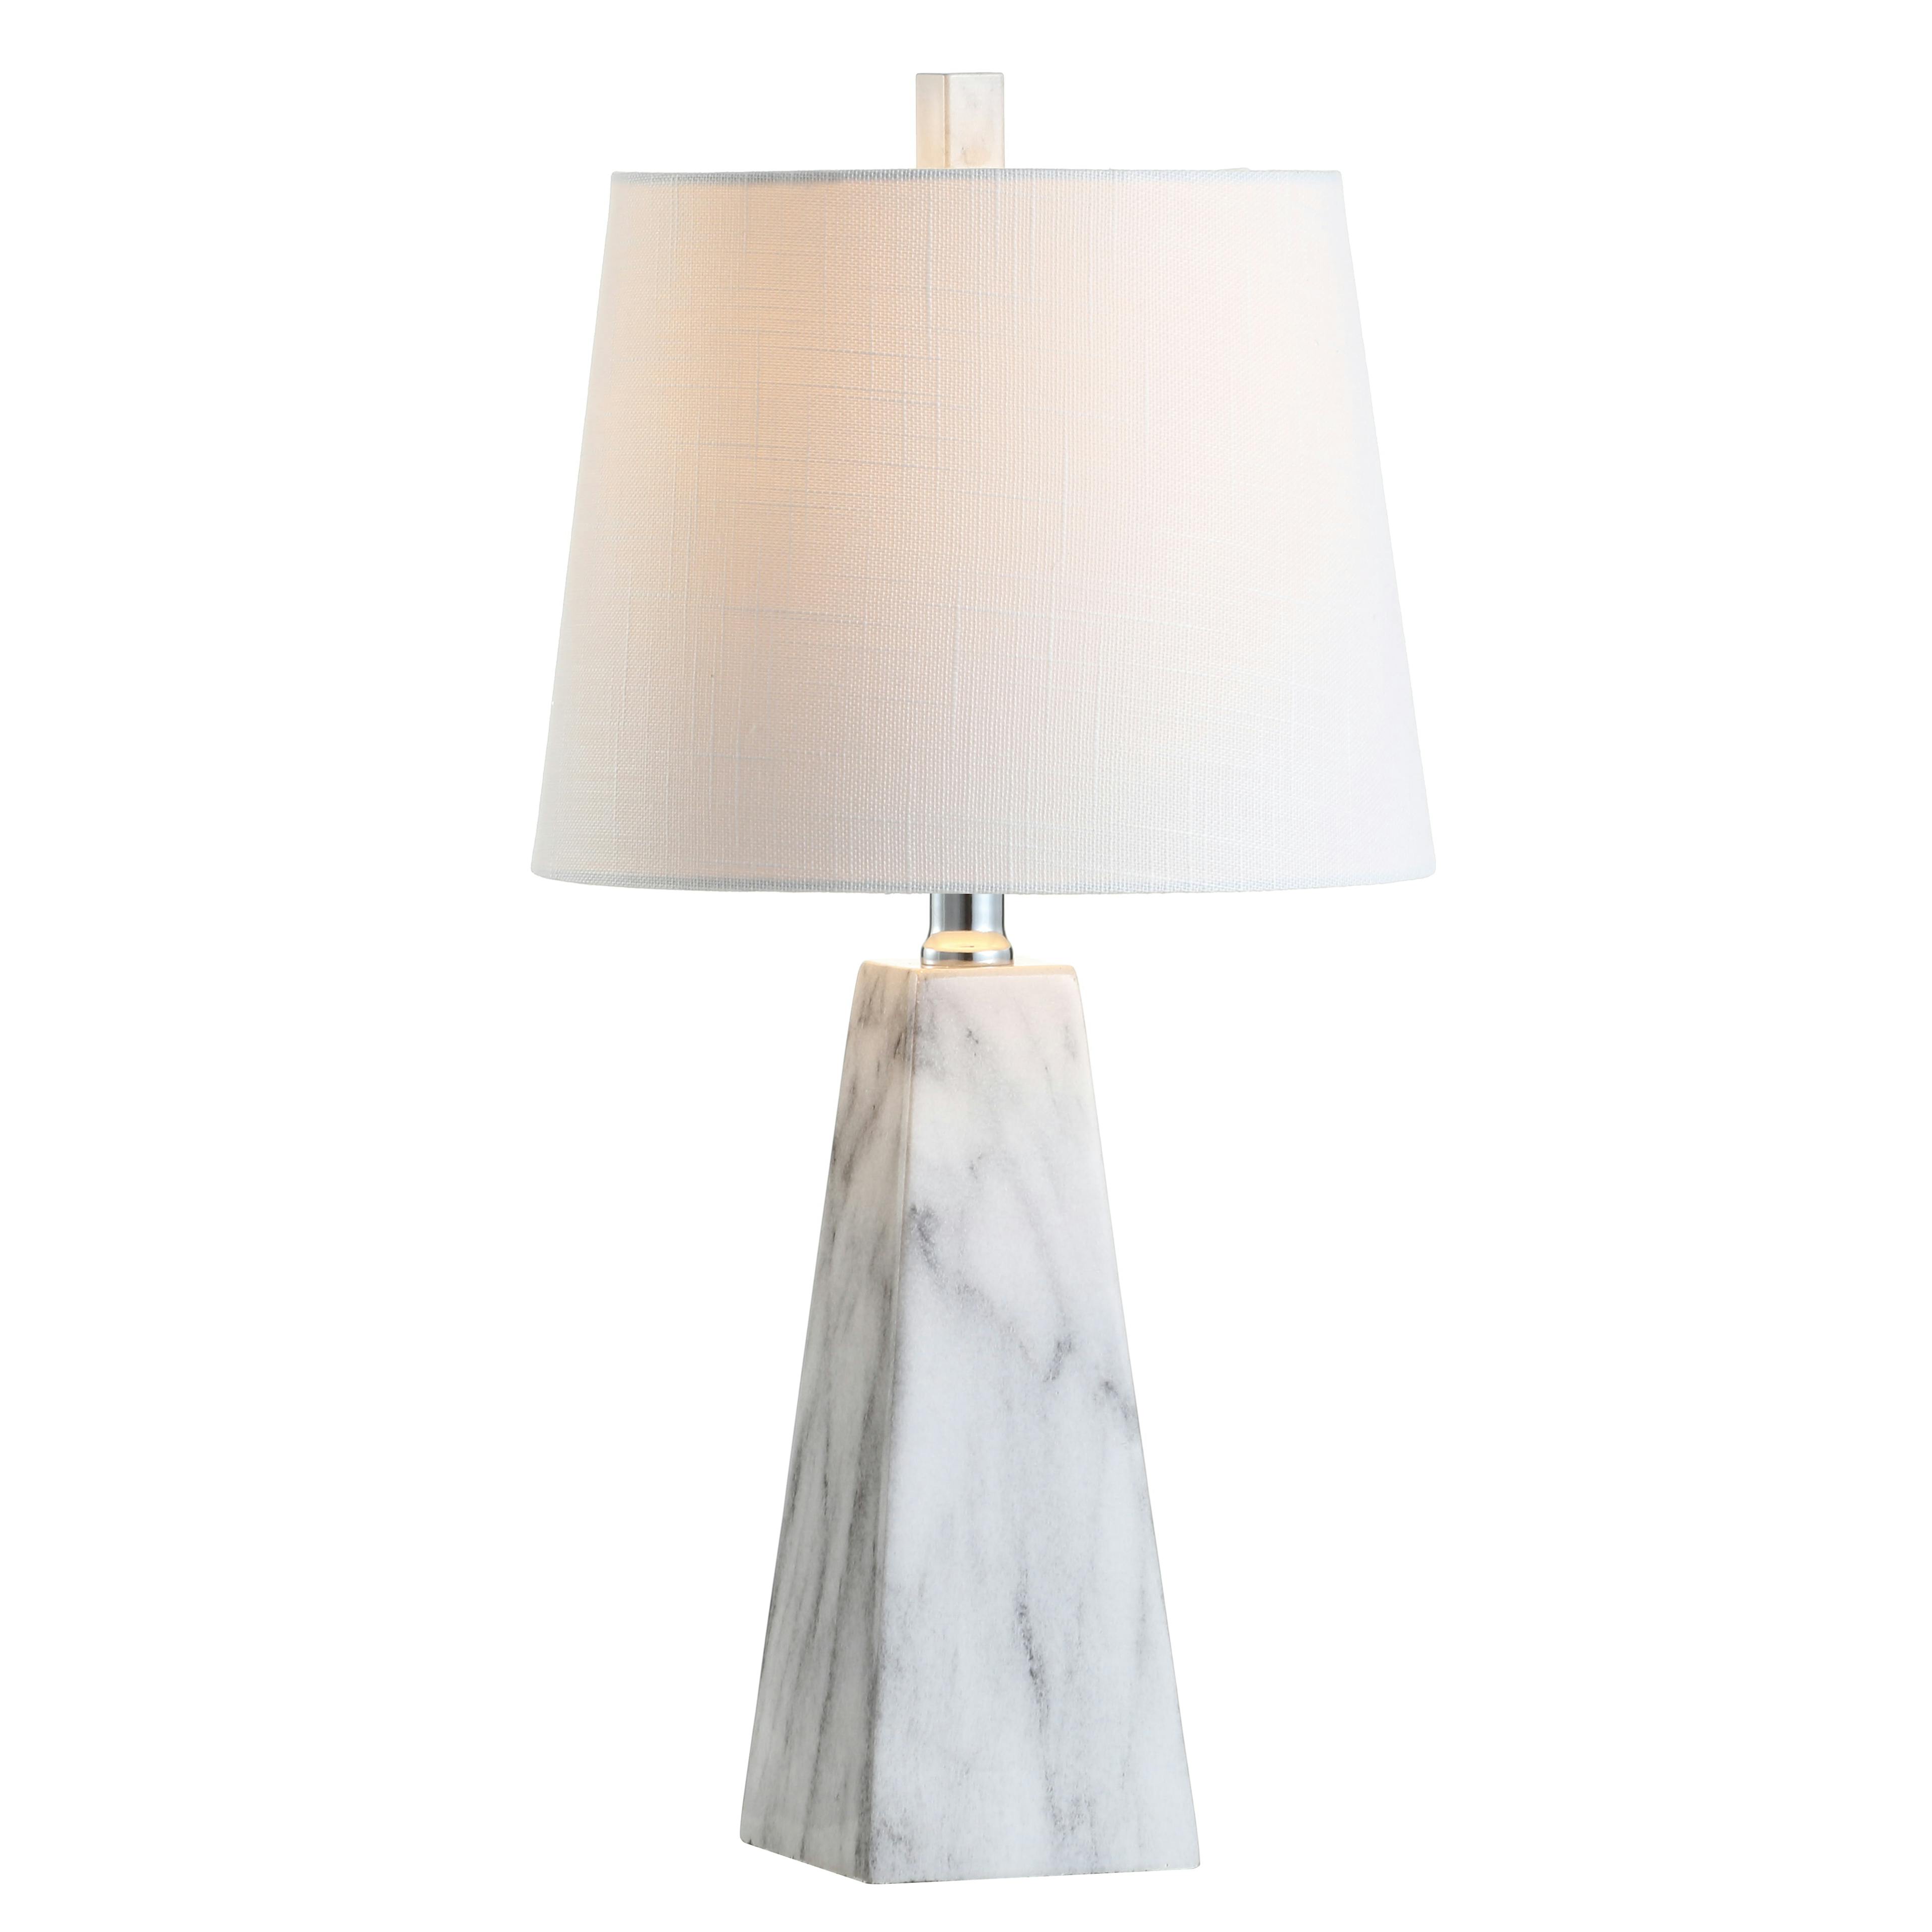 Elegant 20.5" White Marble-Effect Resin Table Lamp with Linen Shade